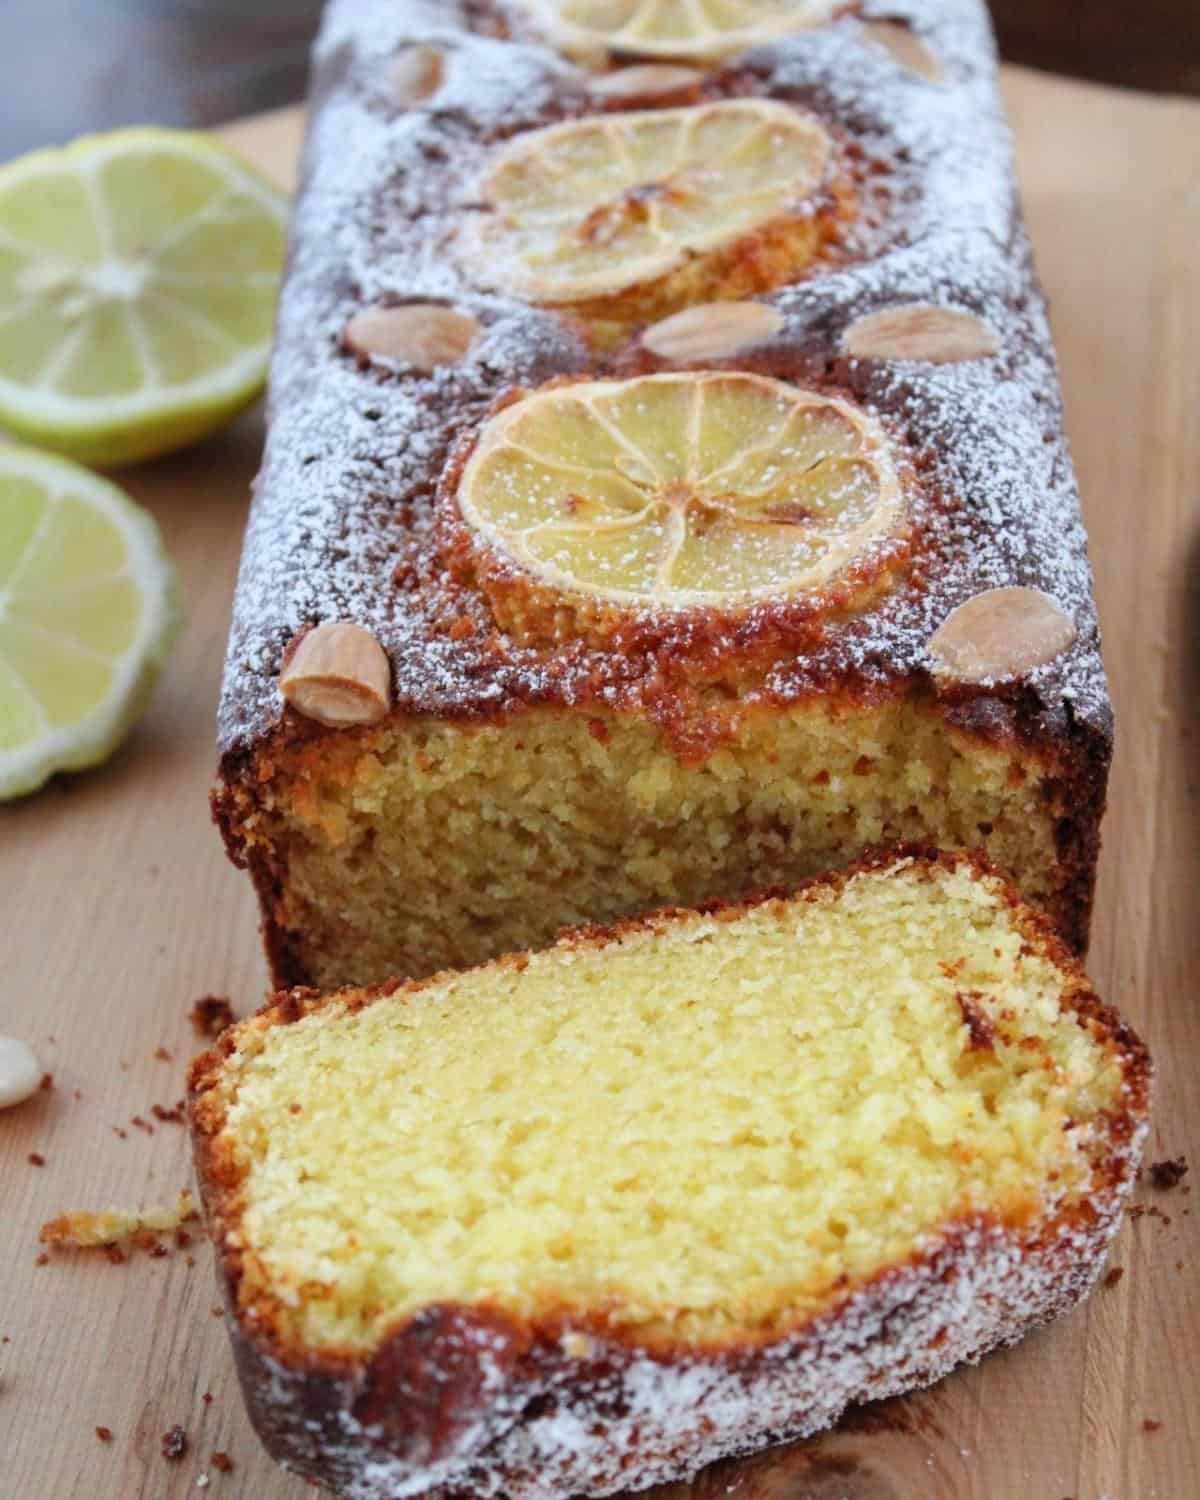 An almond Loaf on a wooden board. The cake is sliced and there are lemon slices and almonds on top